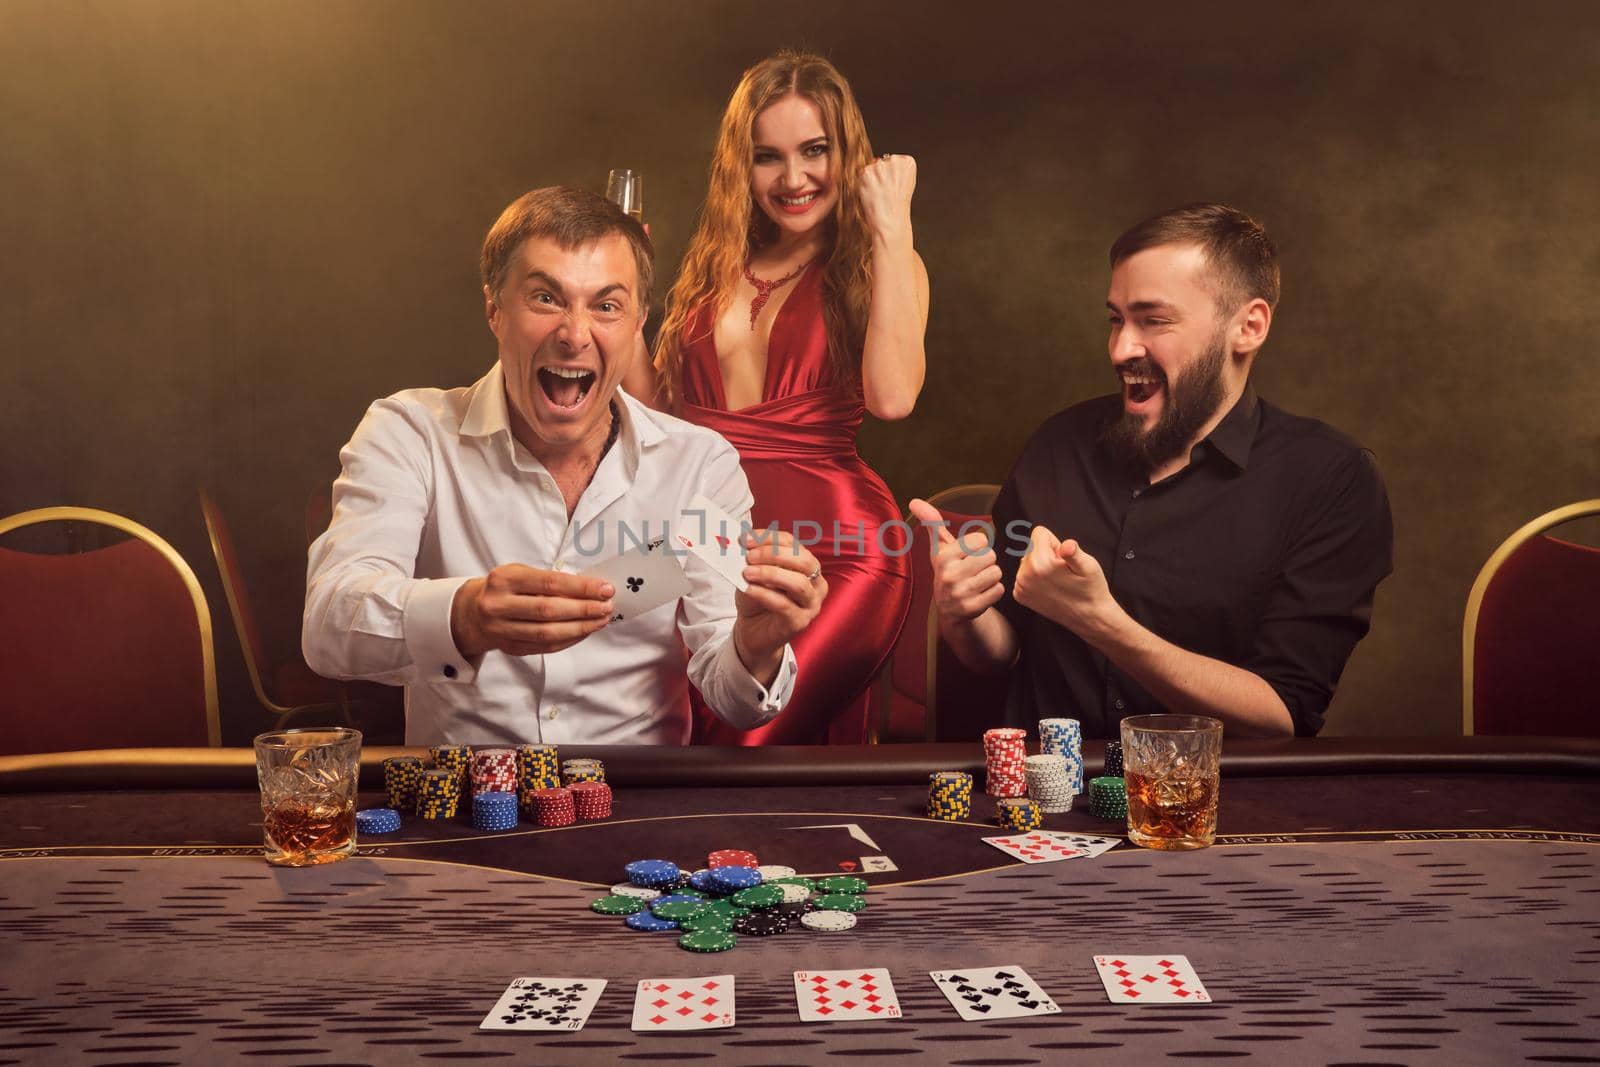 Two athletic friends and charming lady are playing poker at casino. They are rejoicing their win and showing two aces while posing at the table against a yellow backlight on smoke background. Cards, chips, money, gambling, entertainment concept.